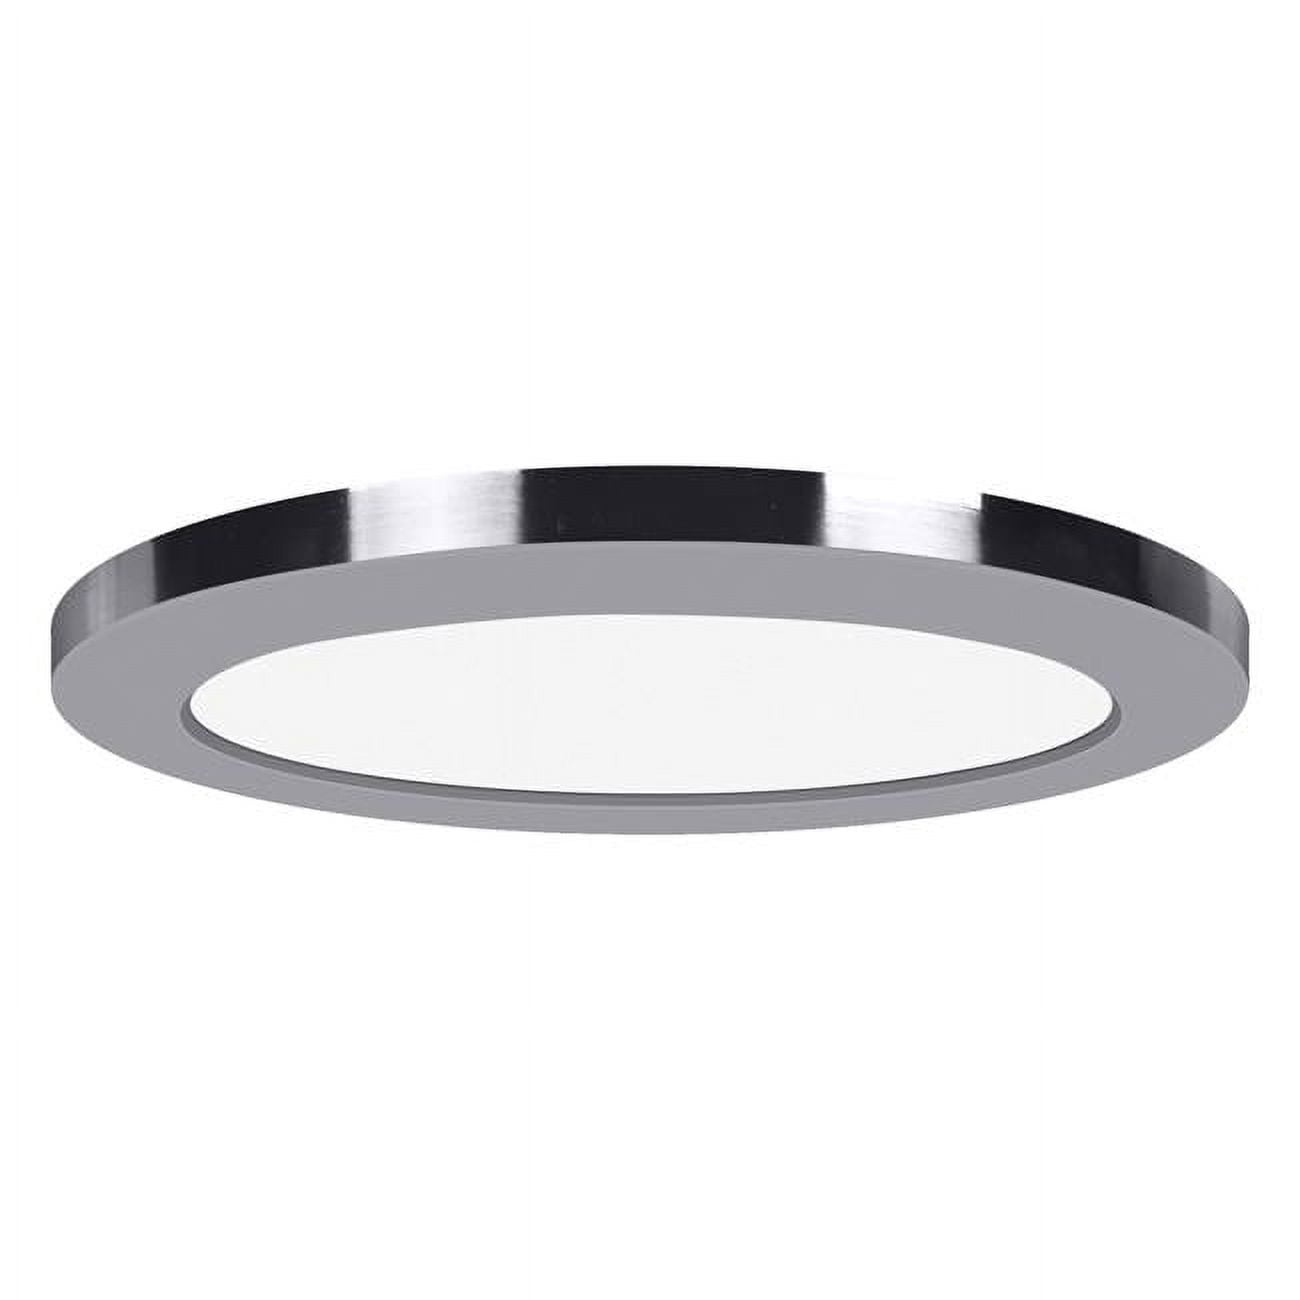 Picture of Access Lighting 20830TRIM-CH 7 in. ModPLUS Chrome Trim Recessed for 20830 & 20836